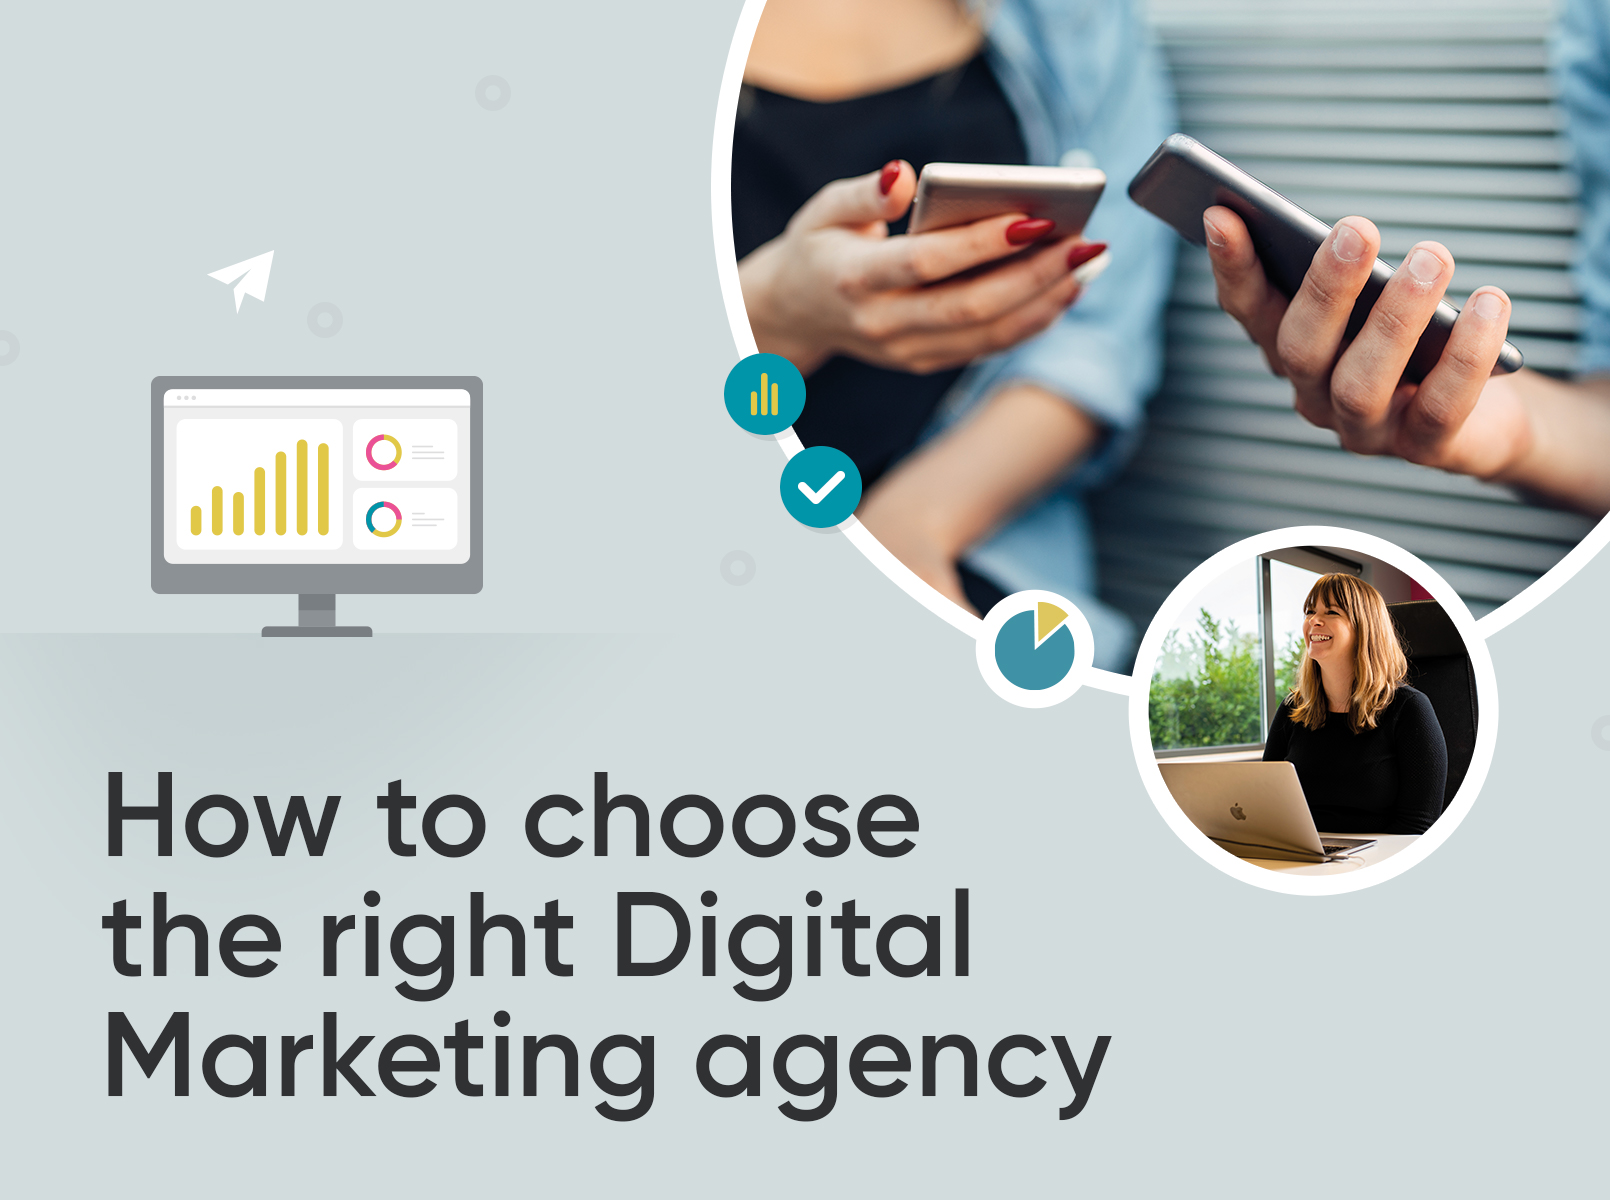 How to choose the right Digital Marketing Agency for you